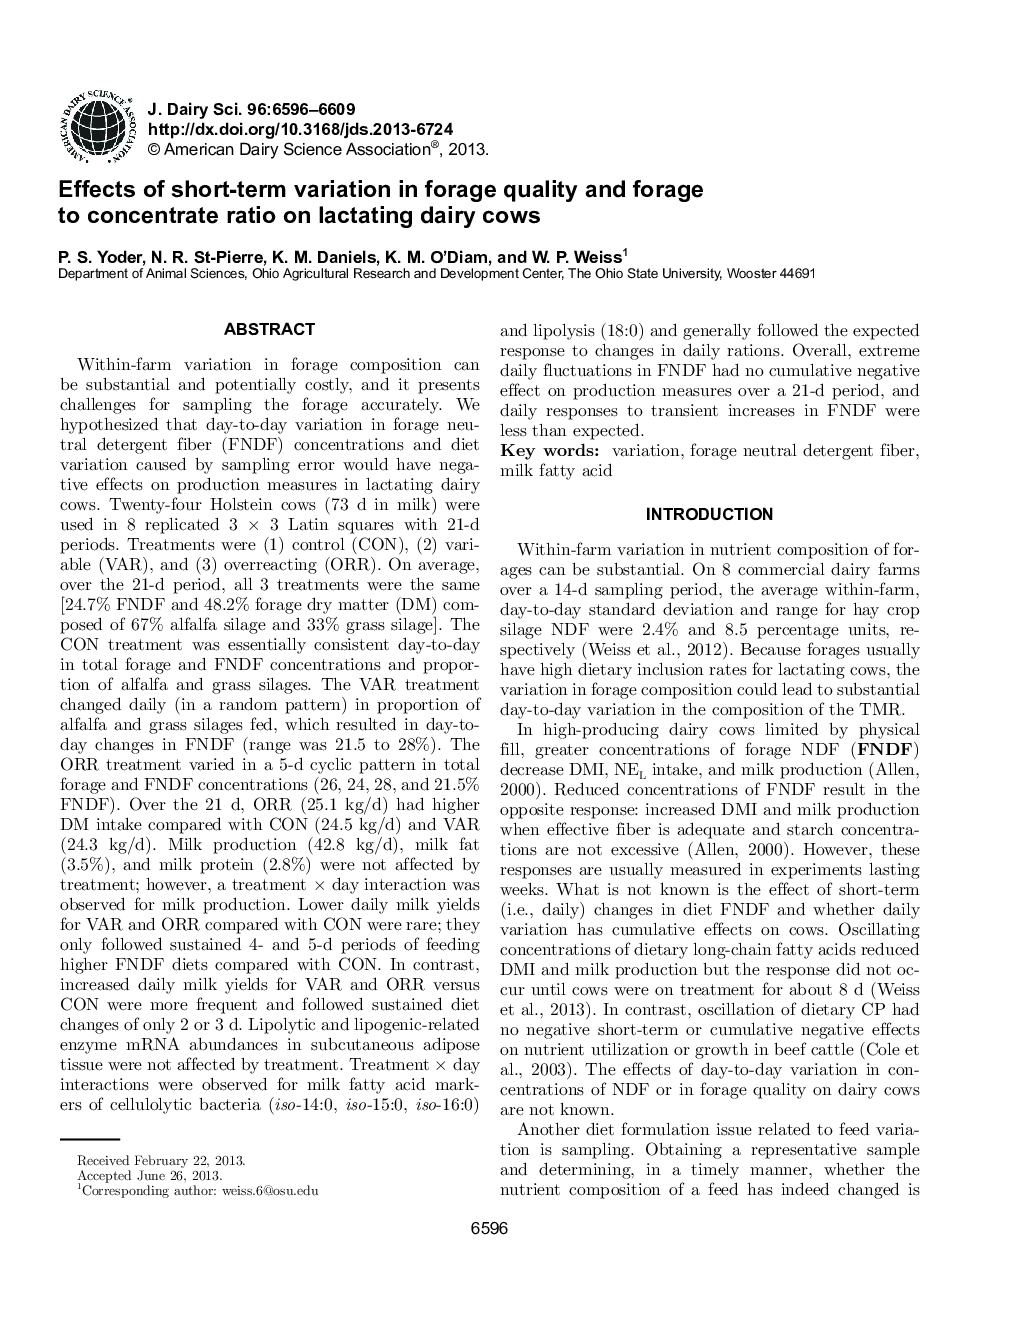 Effects of short-term variation in forage quality and forage to concentrate ratio on lactating dairy cows